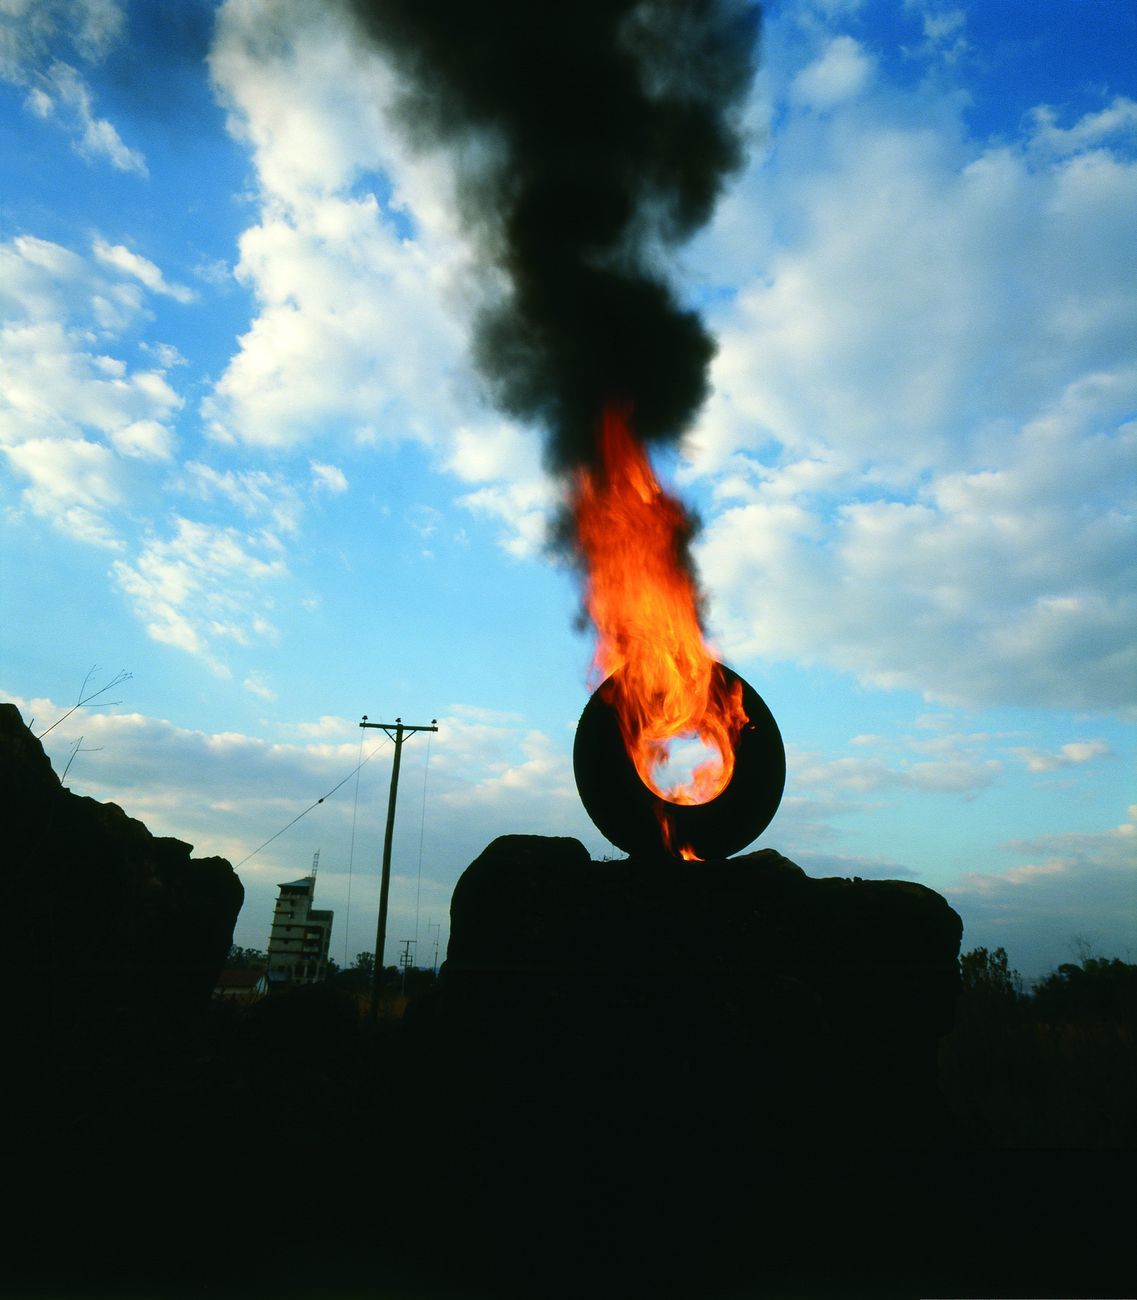 Paolo Canevari, Ring of Fire, 2005